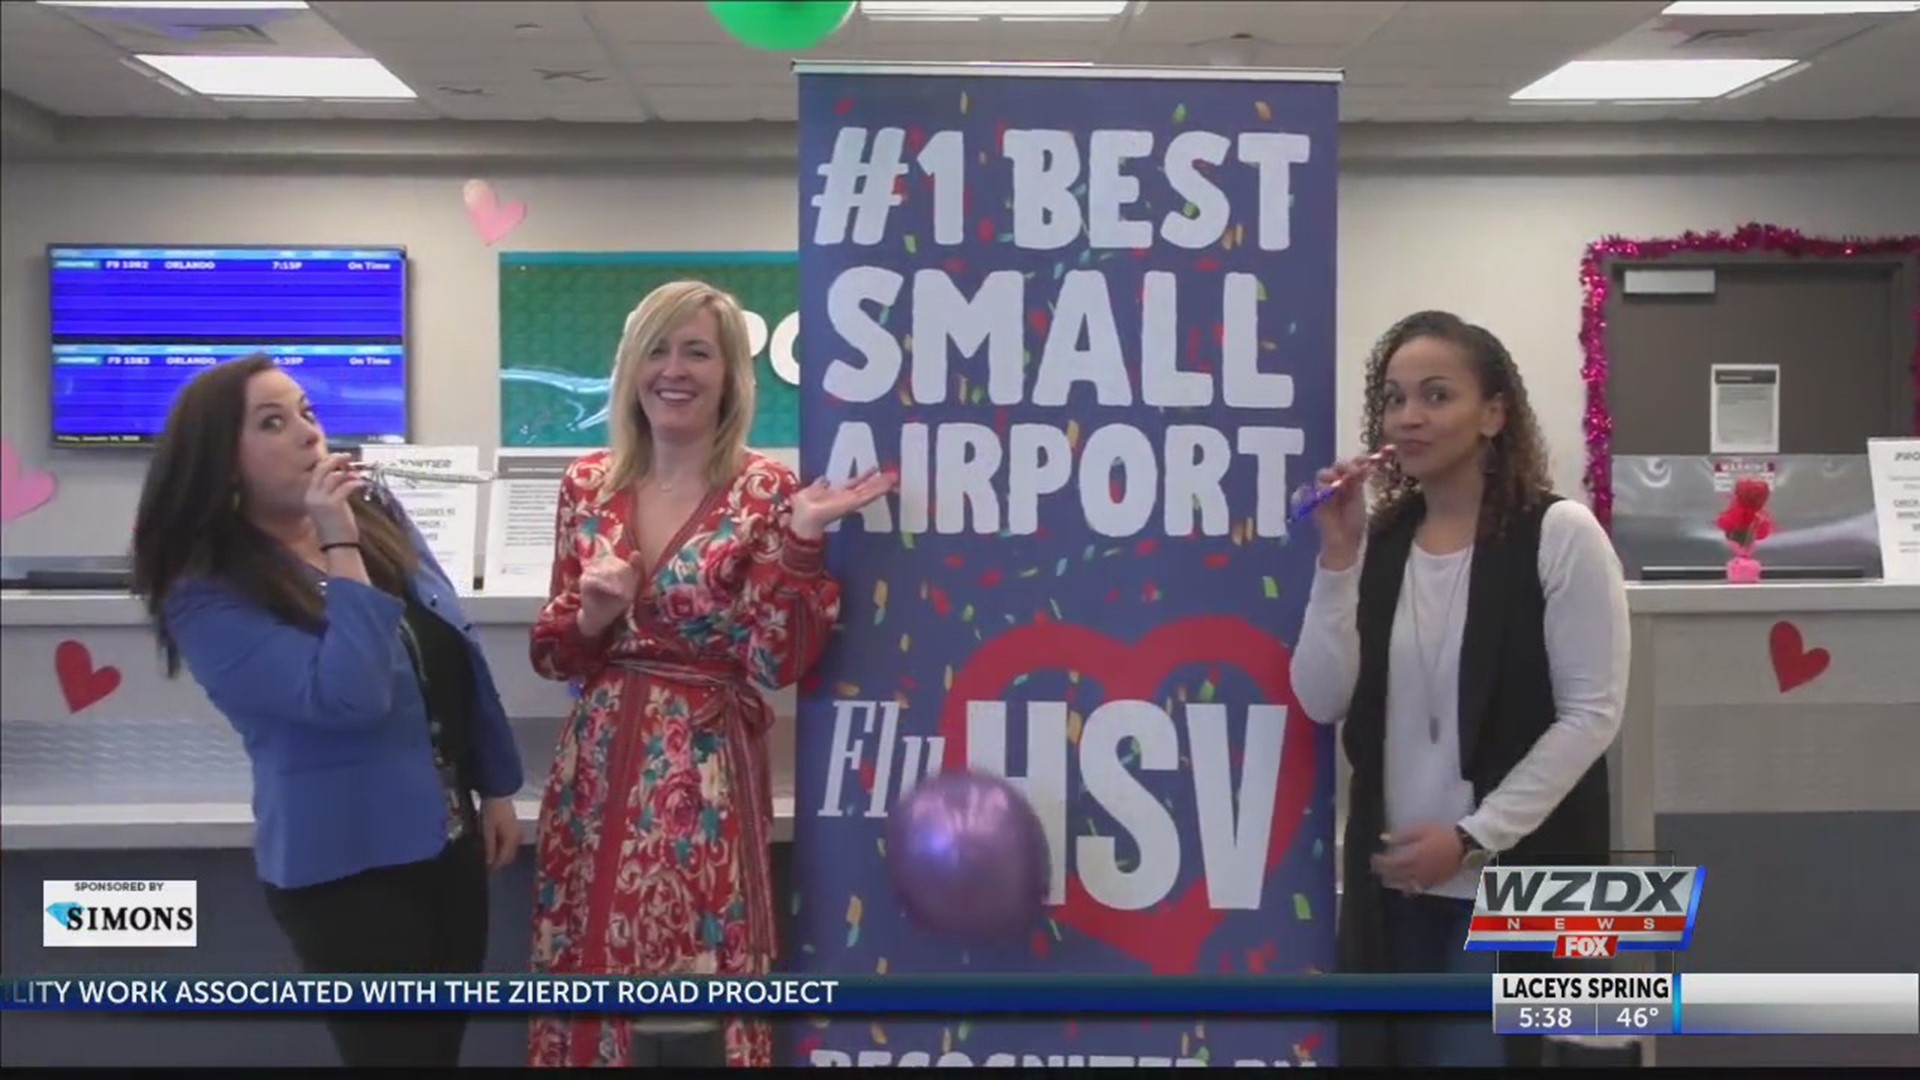 Huntsville International Airport has been named the Best Small Airport in the U.S.